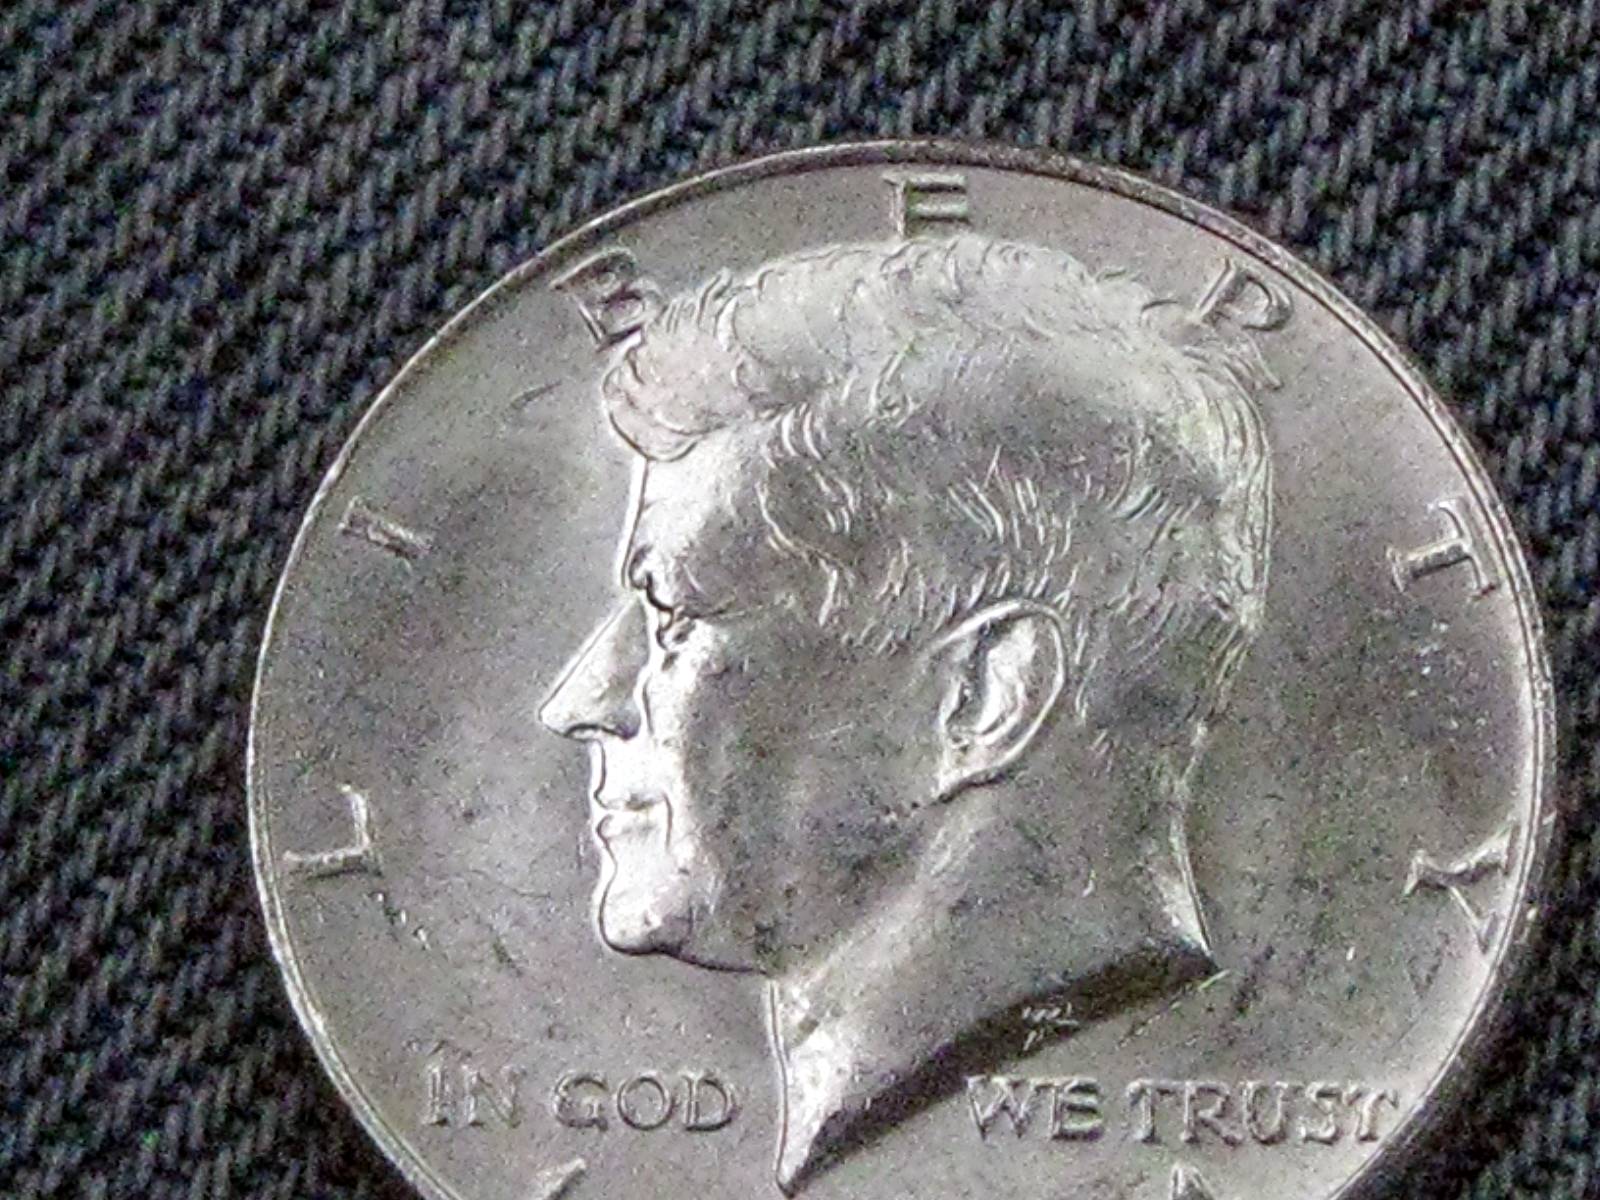 No FG Kennedy Half Dollar Errors: See Where The Letters Should Appear & How Much These Error Coins Are Worth